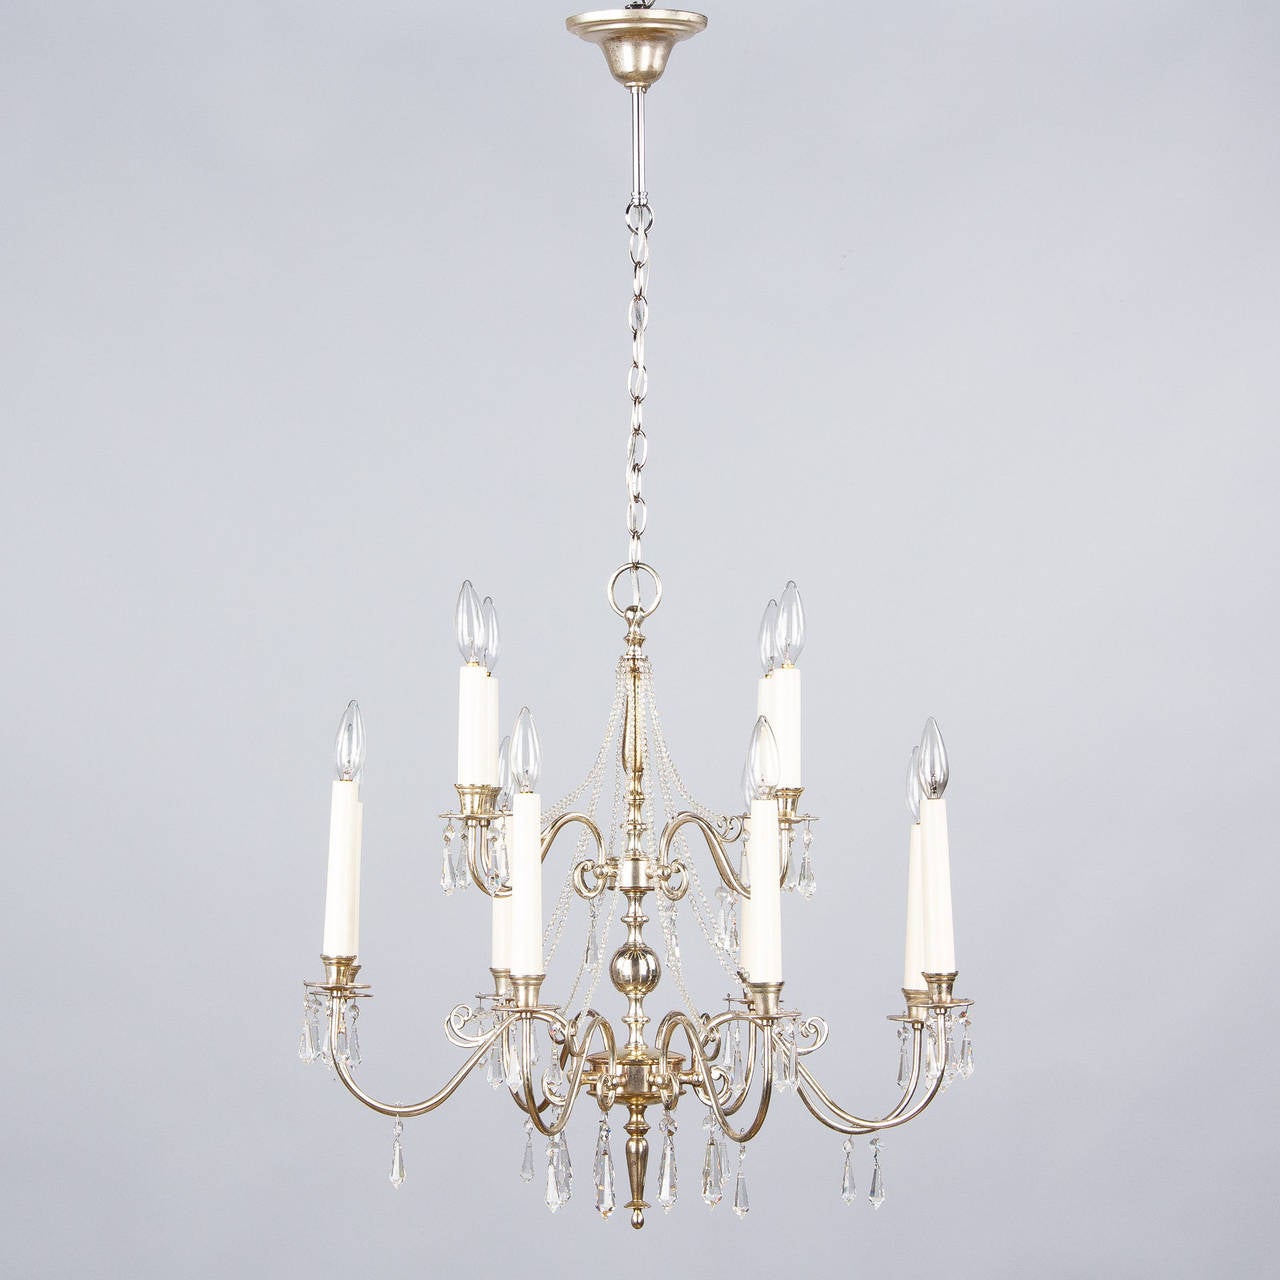 Mid-Century Modern French Midcentury Silver Plated Chandelier with Crystals, 1950s